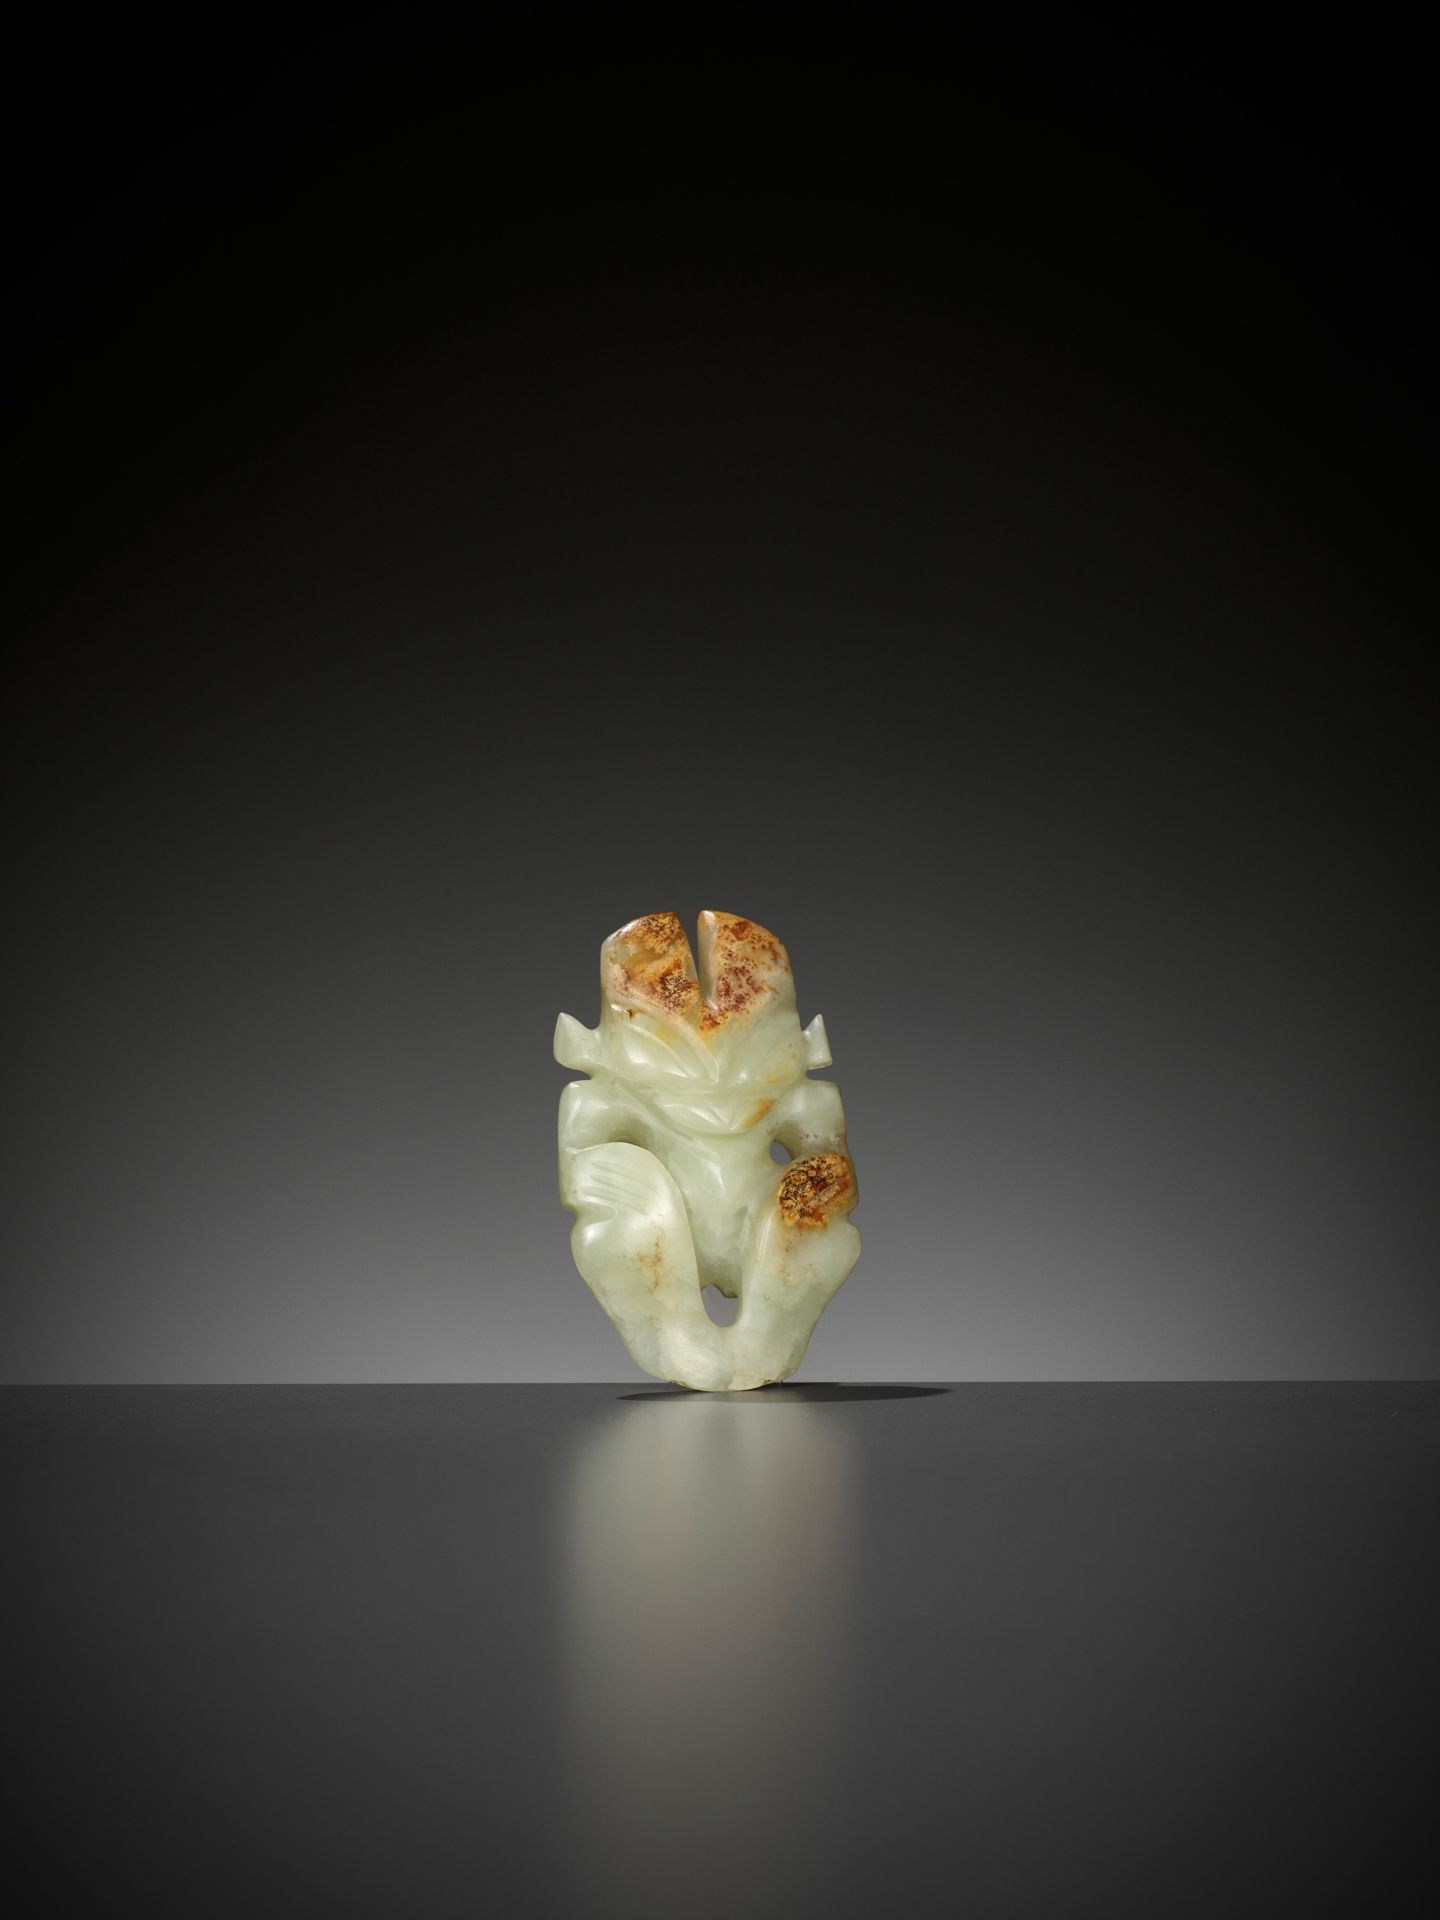 A RARE YELLOW AND RUSSET JADE 'HUMANOID FIGURE' PENDANT, HONGSHAN CULTURE - Image 3 of 10